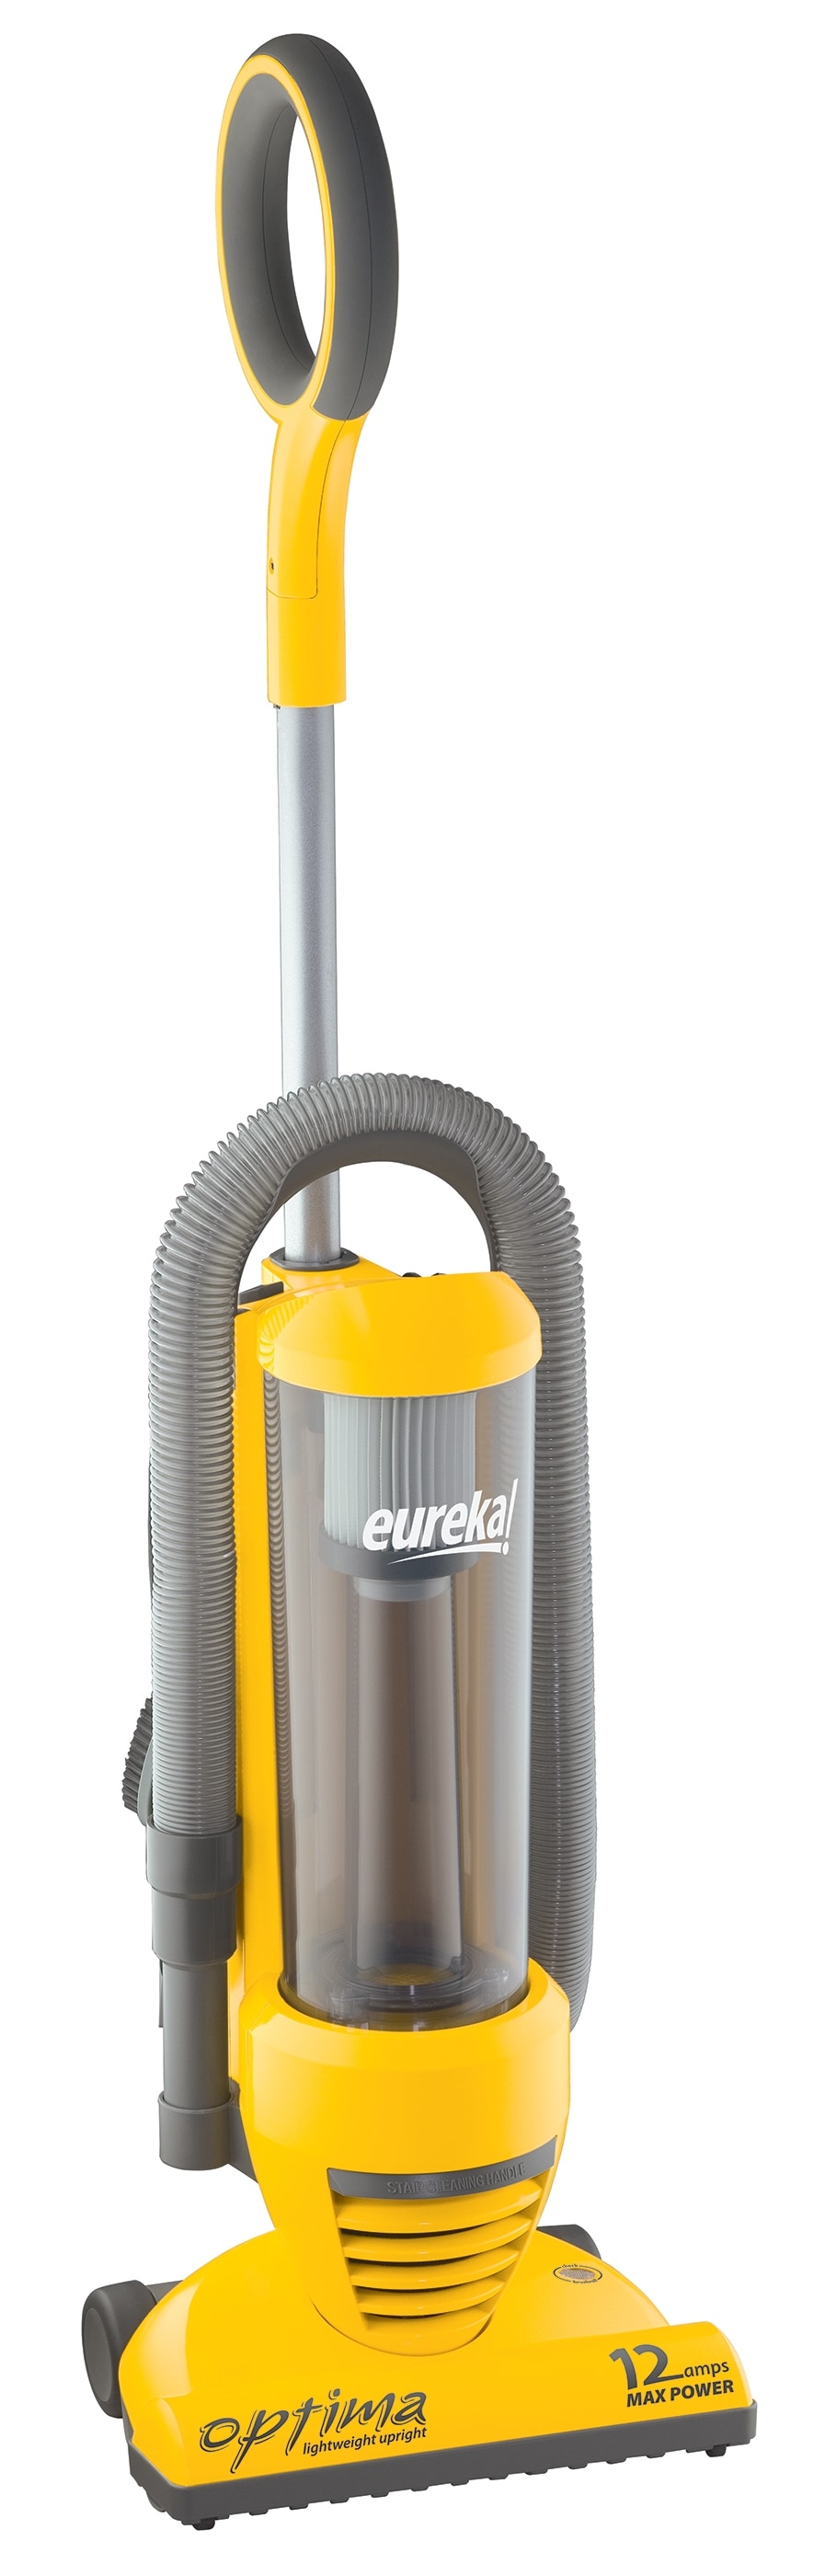 Eureka C2095A Commercial Bagged Upright Vacuum 110 Volt ( Only For USA)